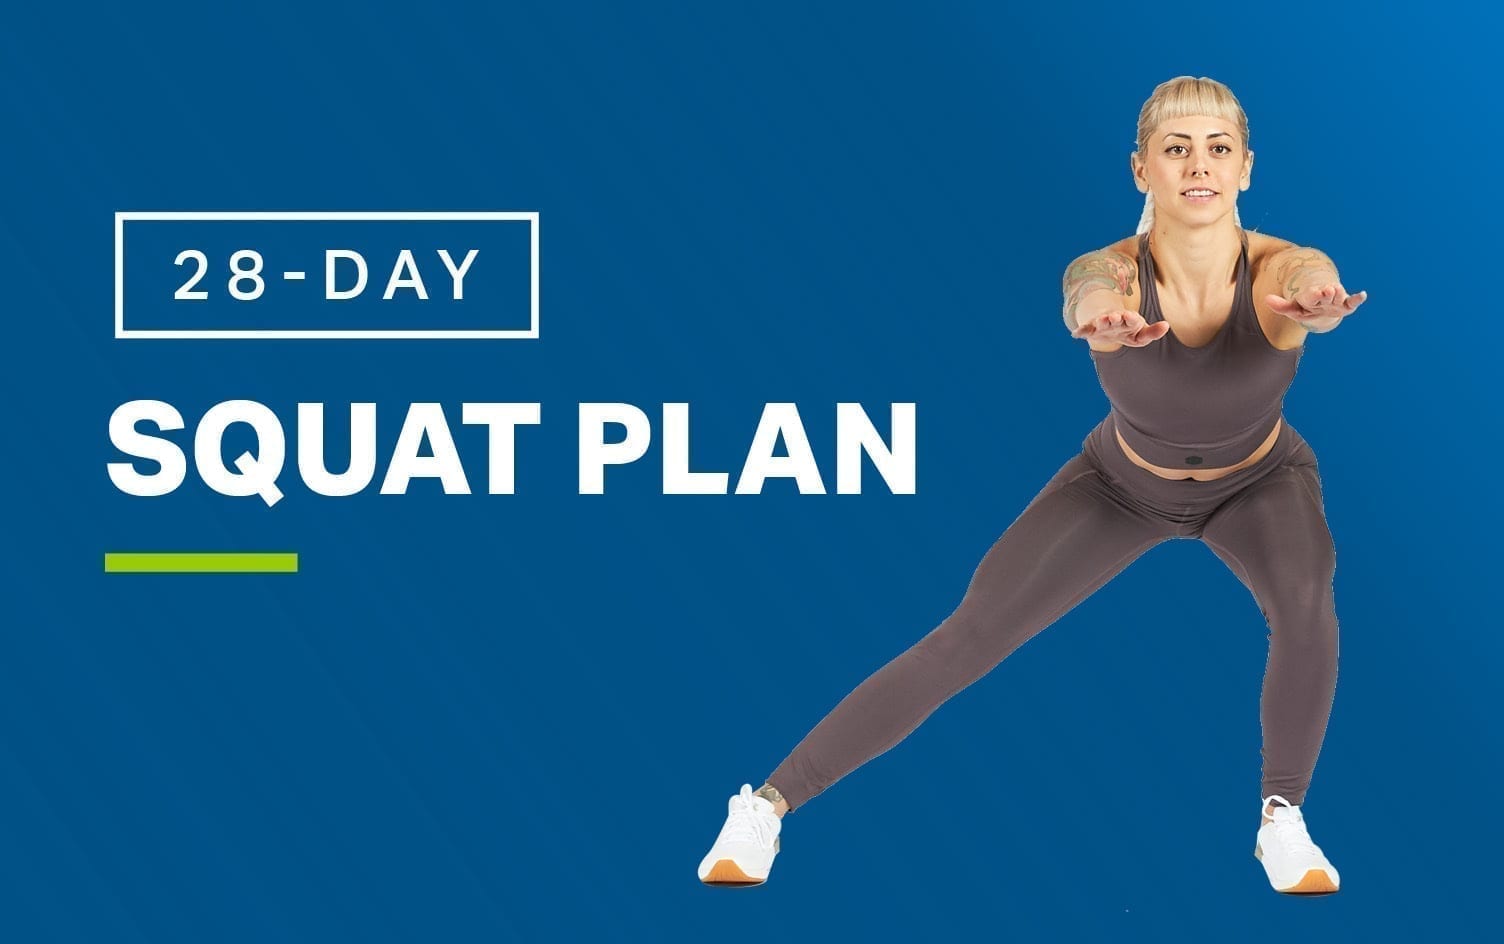 What Type of Squats Make Your Bum Bigger? Try Our 7 Squats!